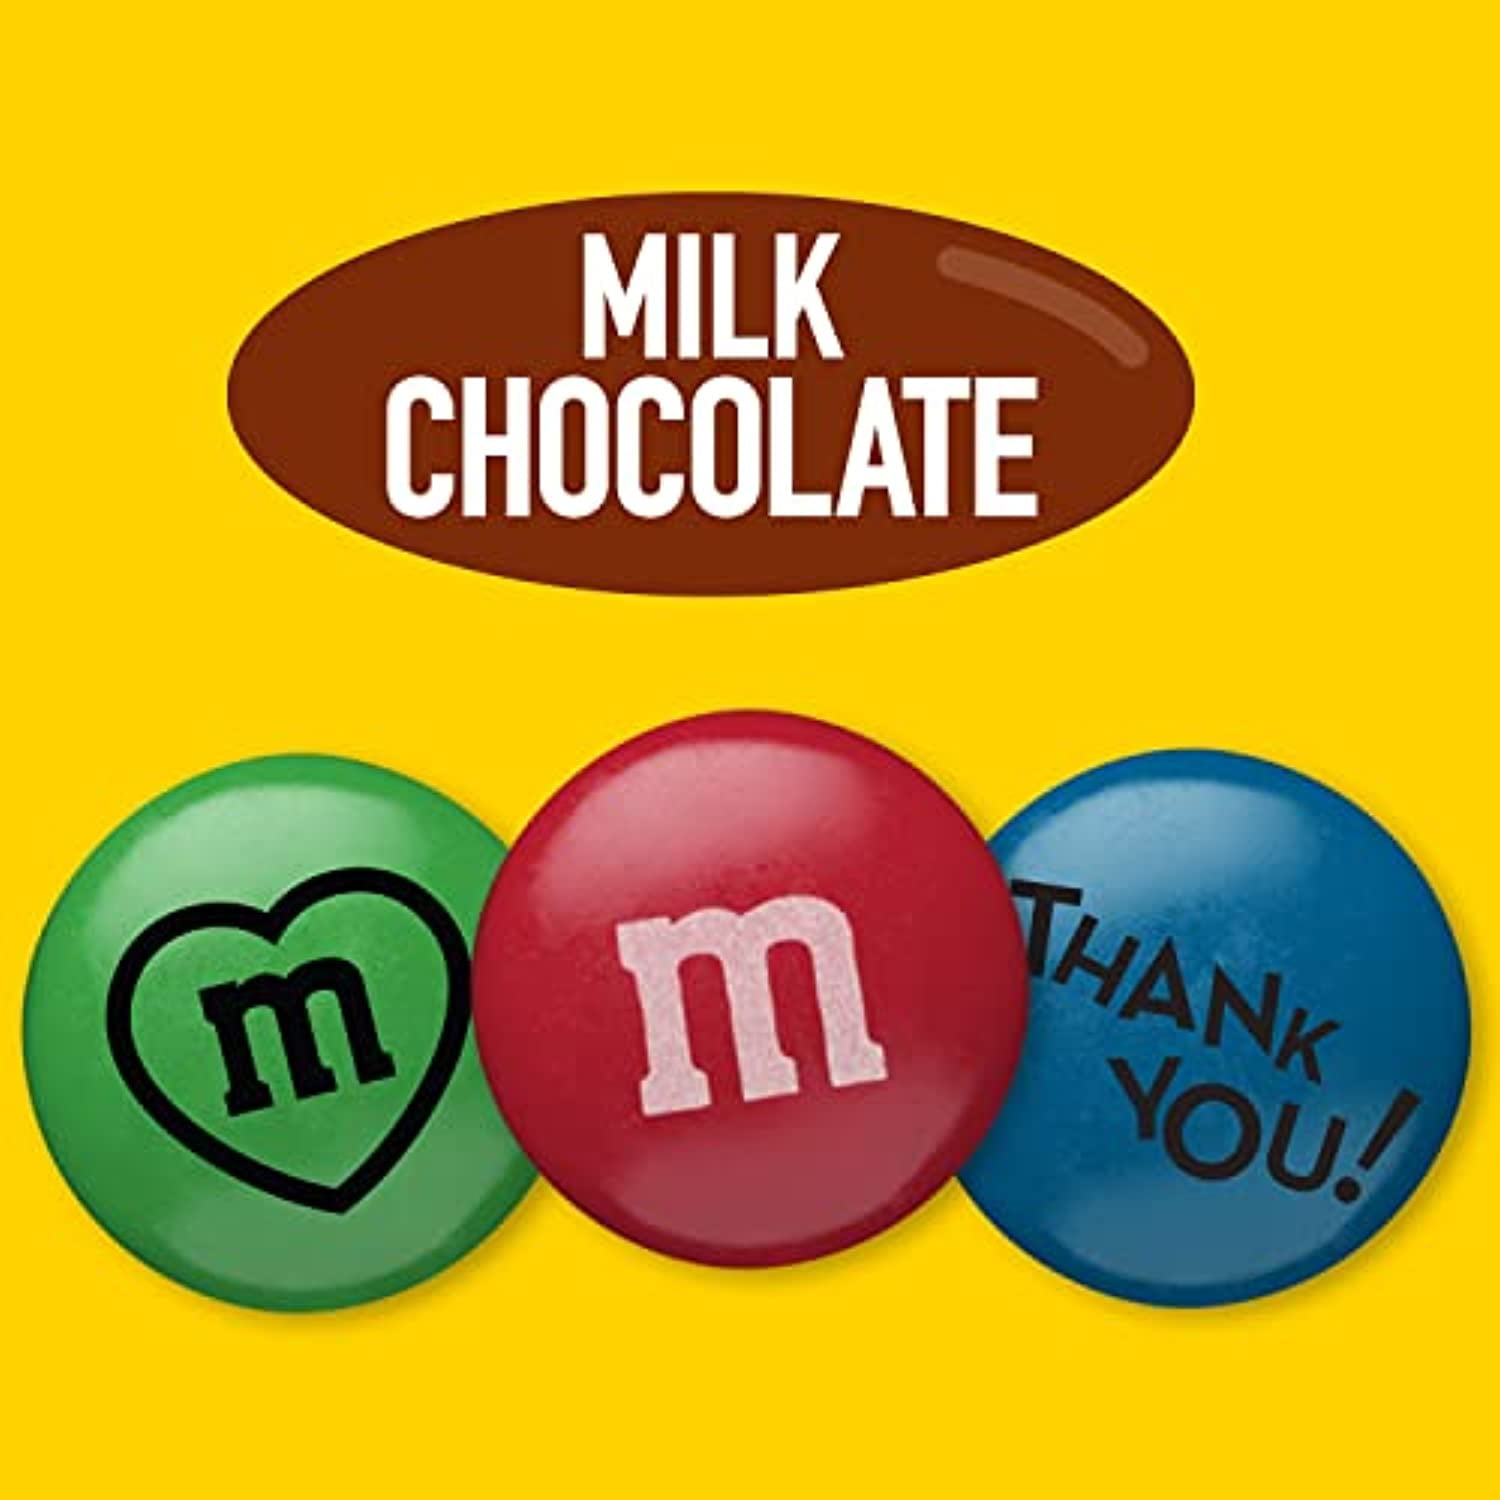  M&M'S Pre-Printed Patriotic Milk Chocolate Candy - 2lbs of  bulk candy in resealable bag perfect for 4th of July Parties, Patriotic  Celebrations, Election Parties and DIY American Themed Gifts 